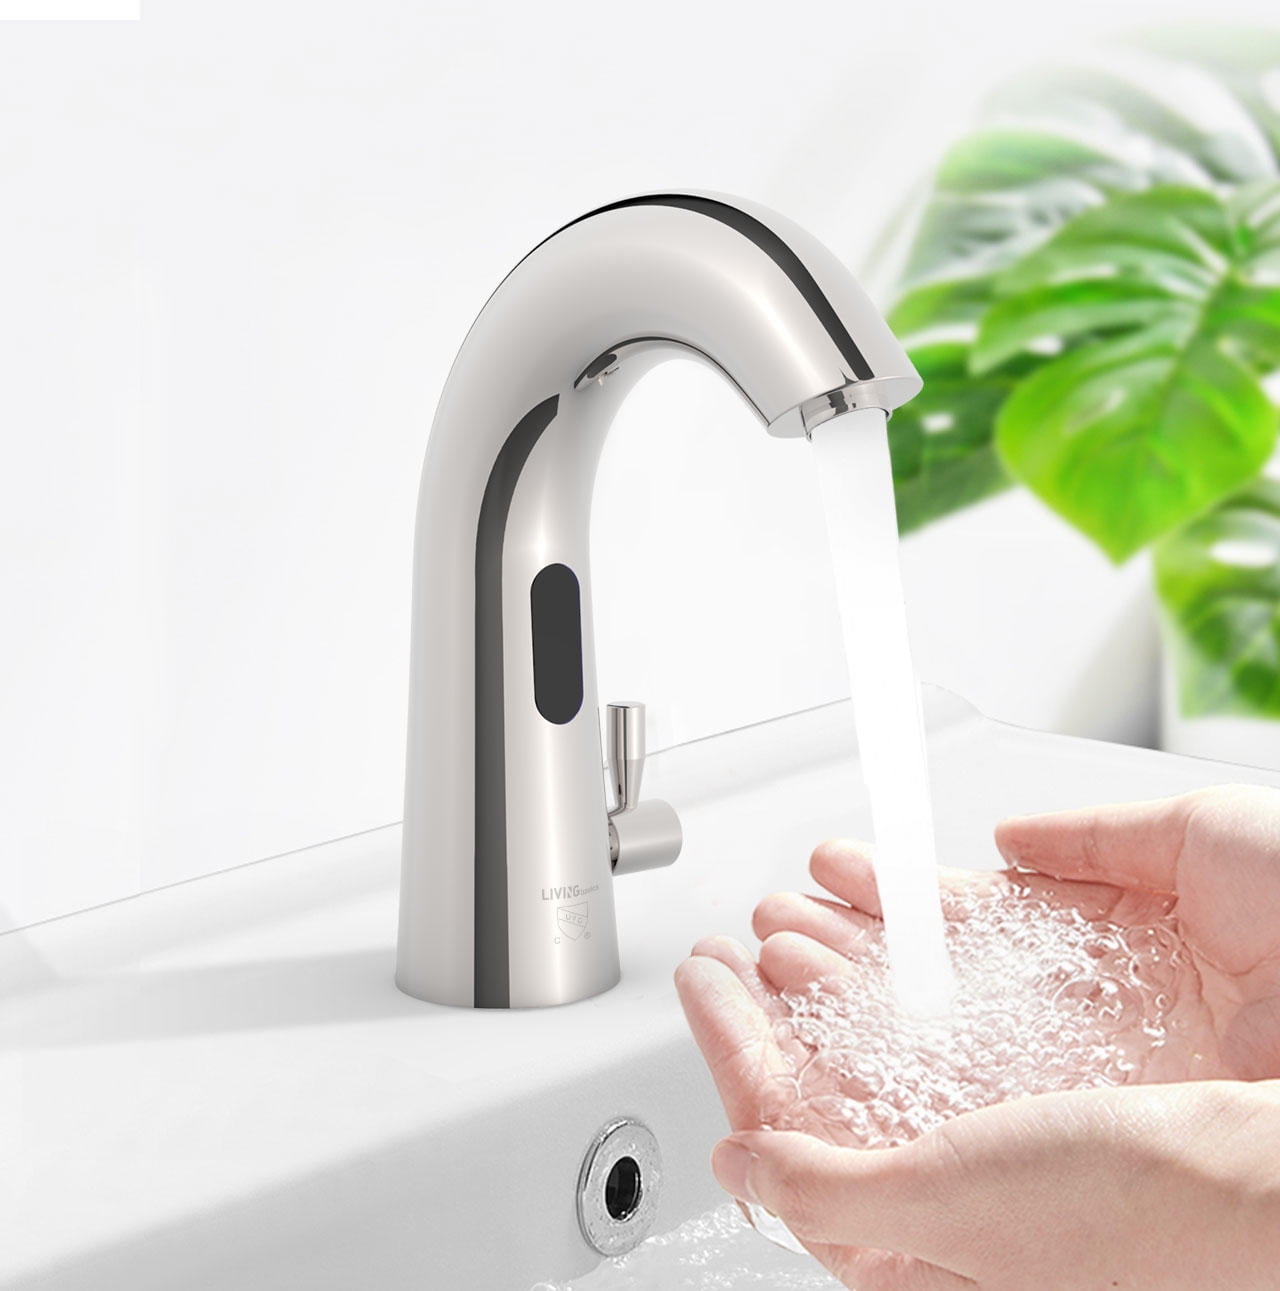 Automatic Hands Touch Free Sensor Faucet Bathroom Basin Cold Water Faucet 